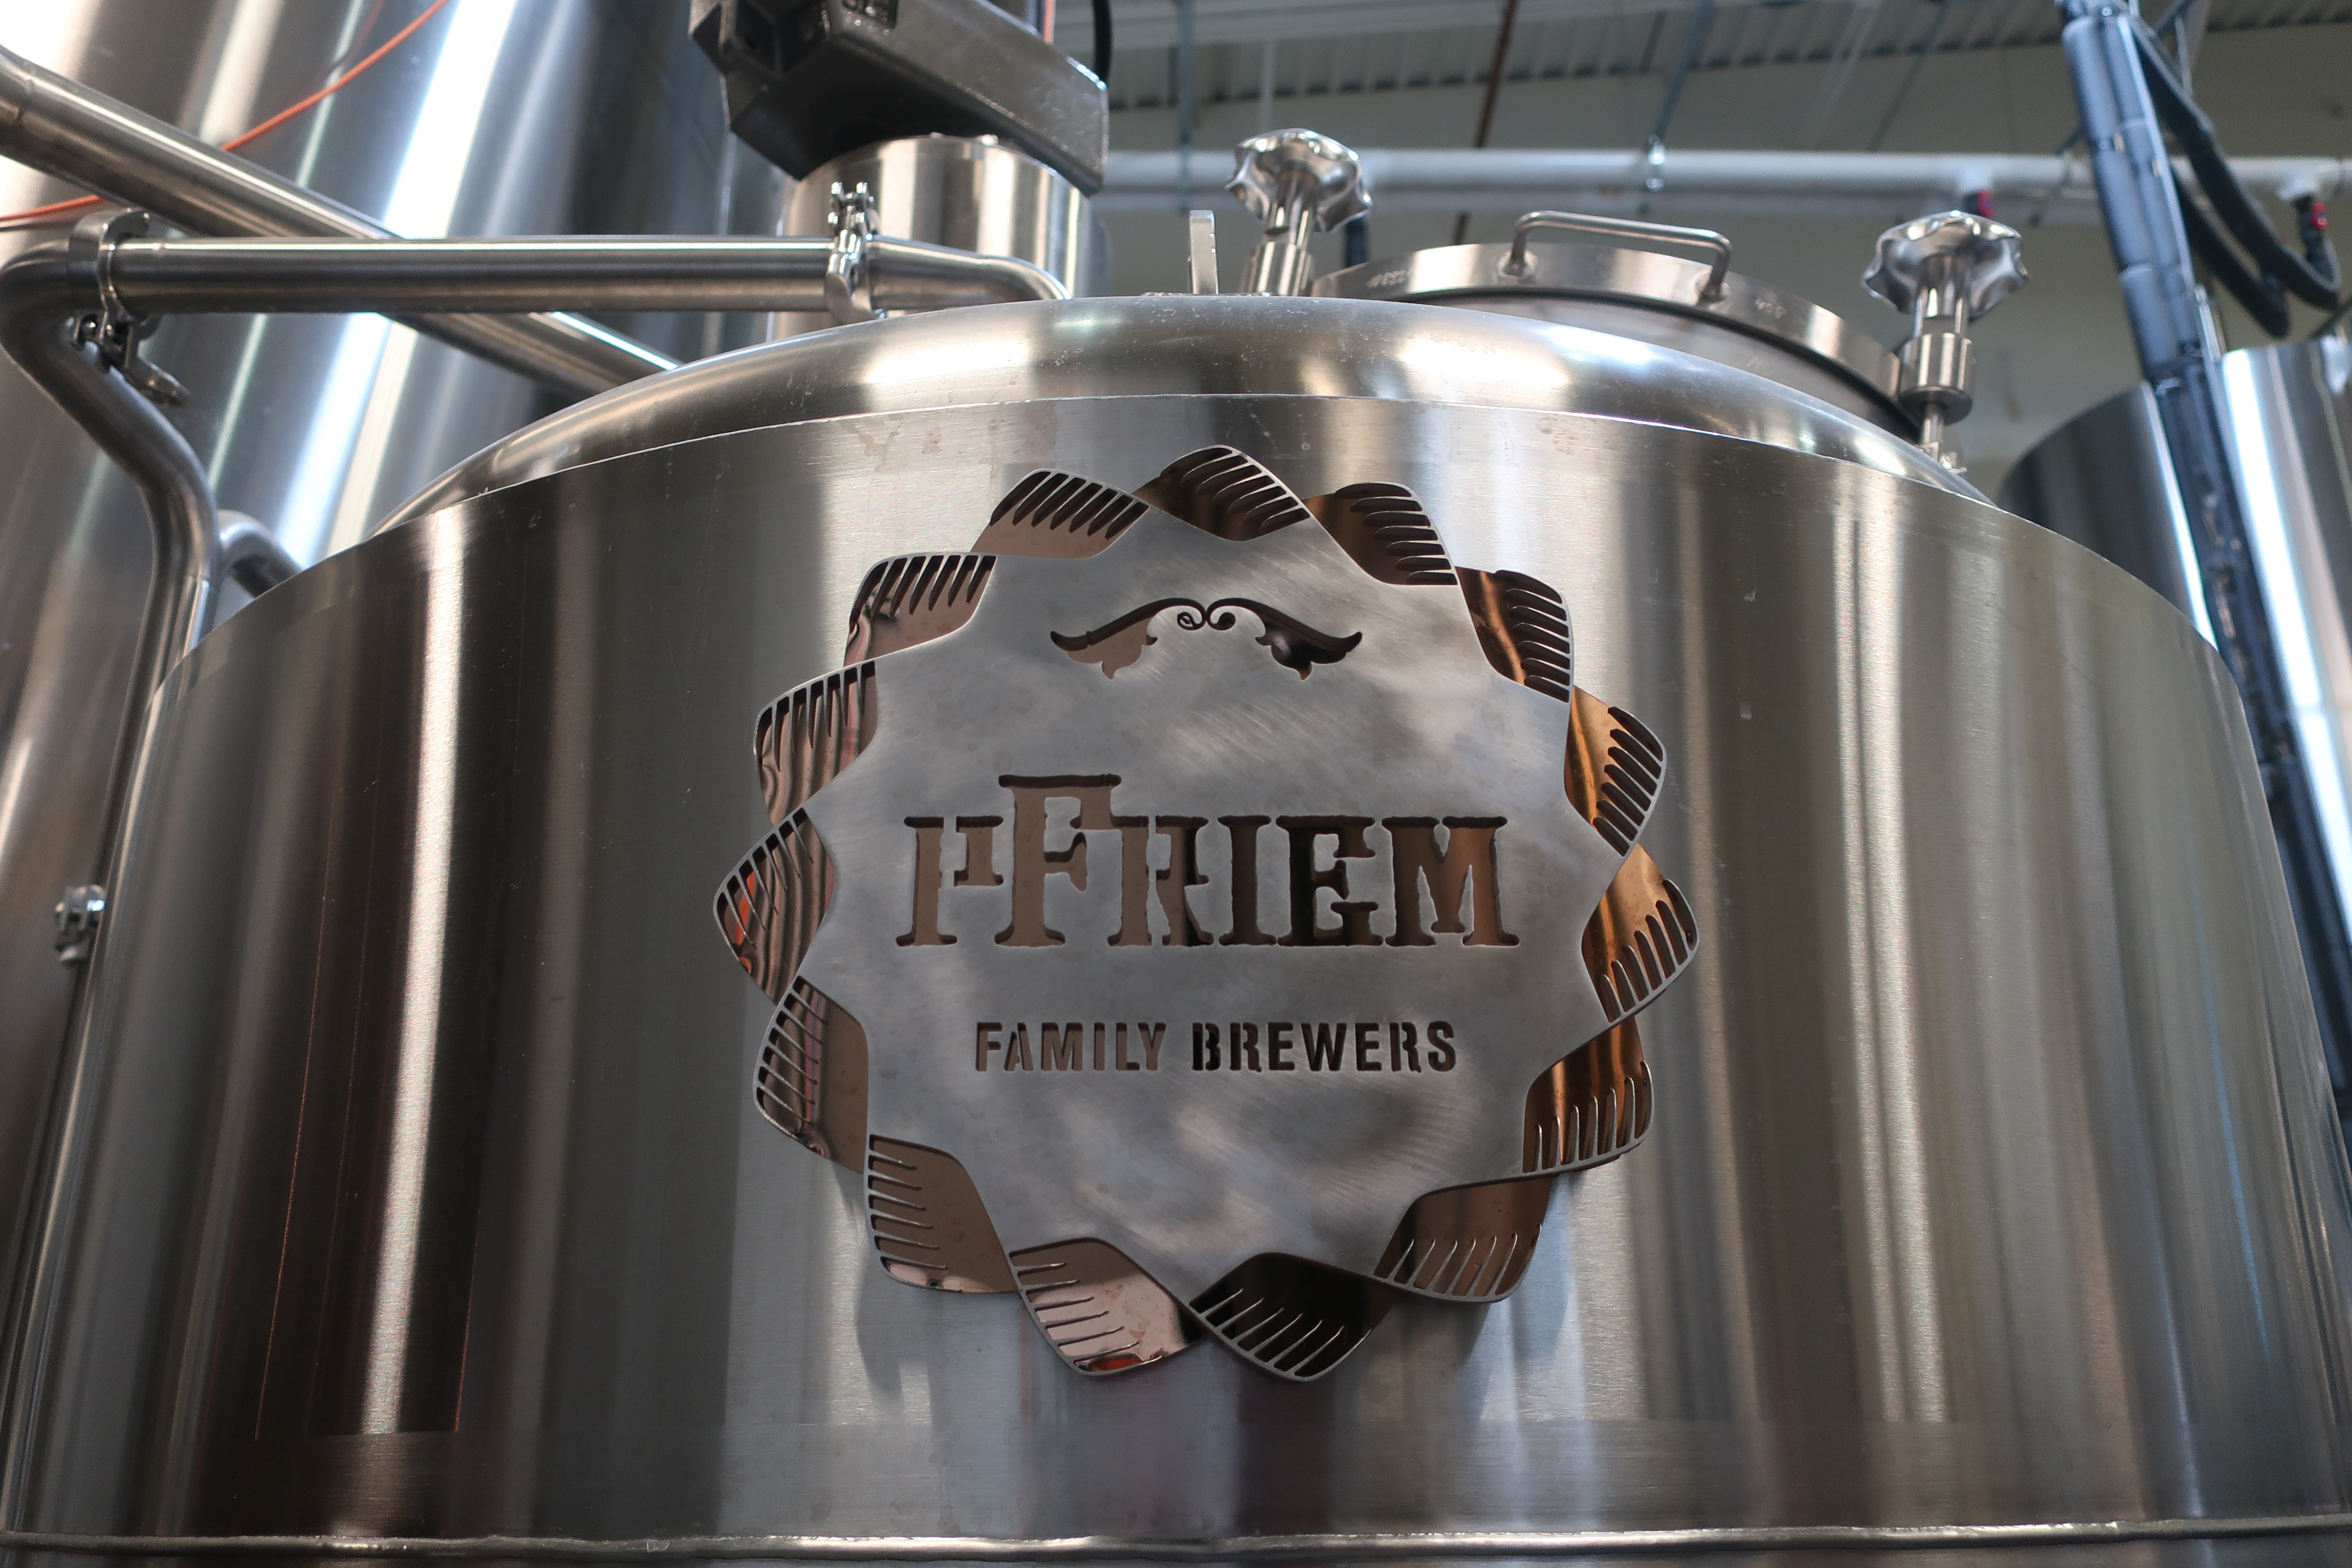 pFriem Family Brewers in Hood River, Oregon.